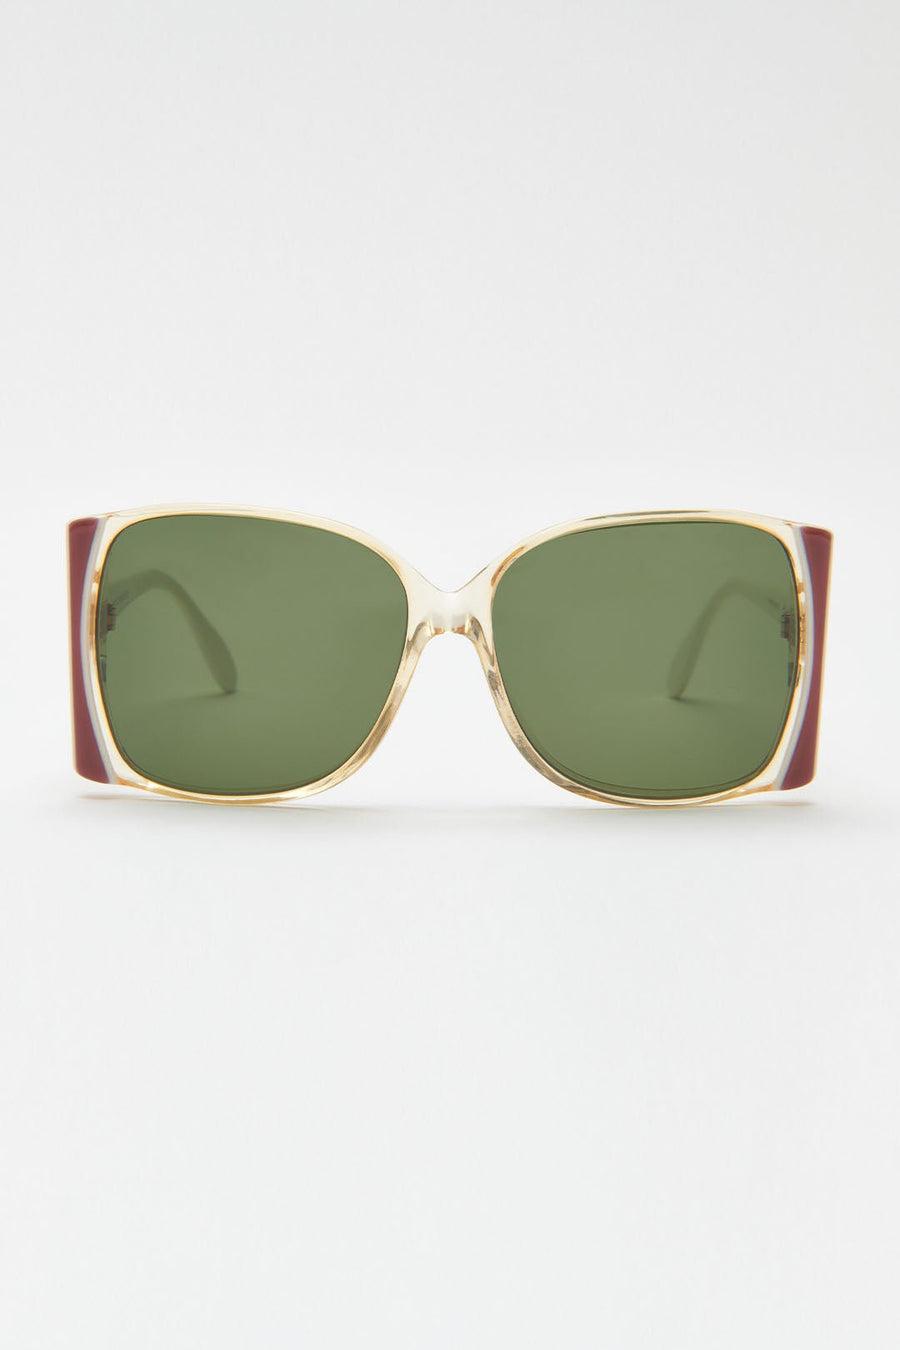 VINTAGE SILHOUETTE SUNGLASSES, WHITE - Burning Torch Online Boutique